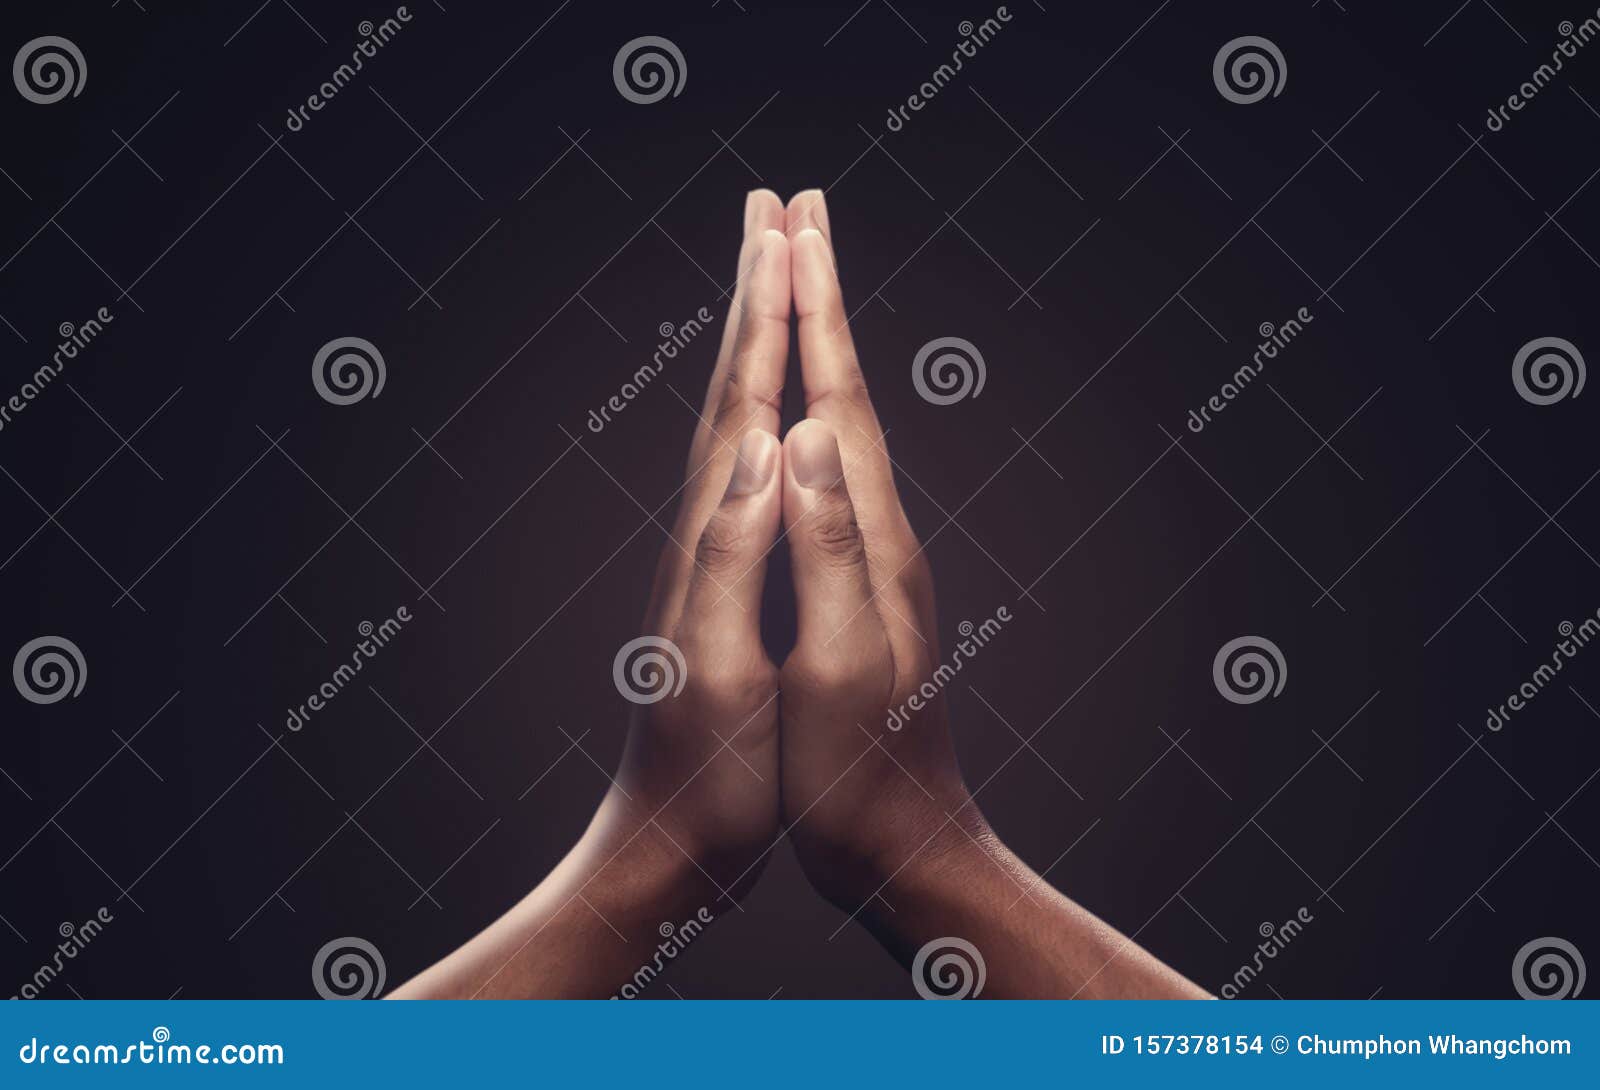 praying hands with faith in religion and belief in god on dark background. power of hope or love and devotion. namaste or namaskar